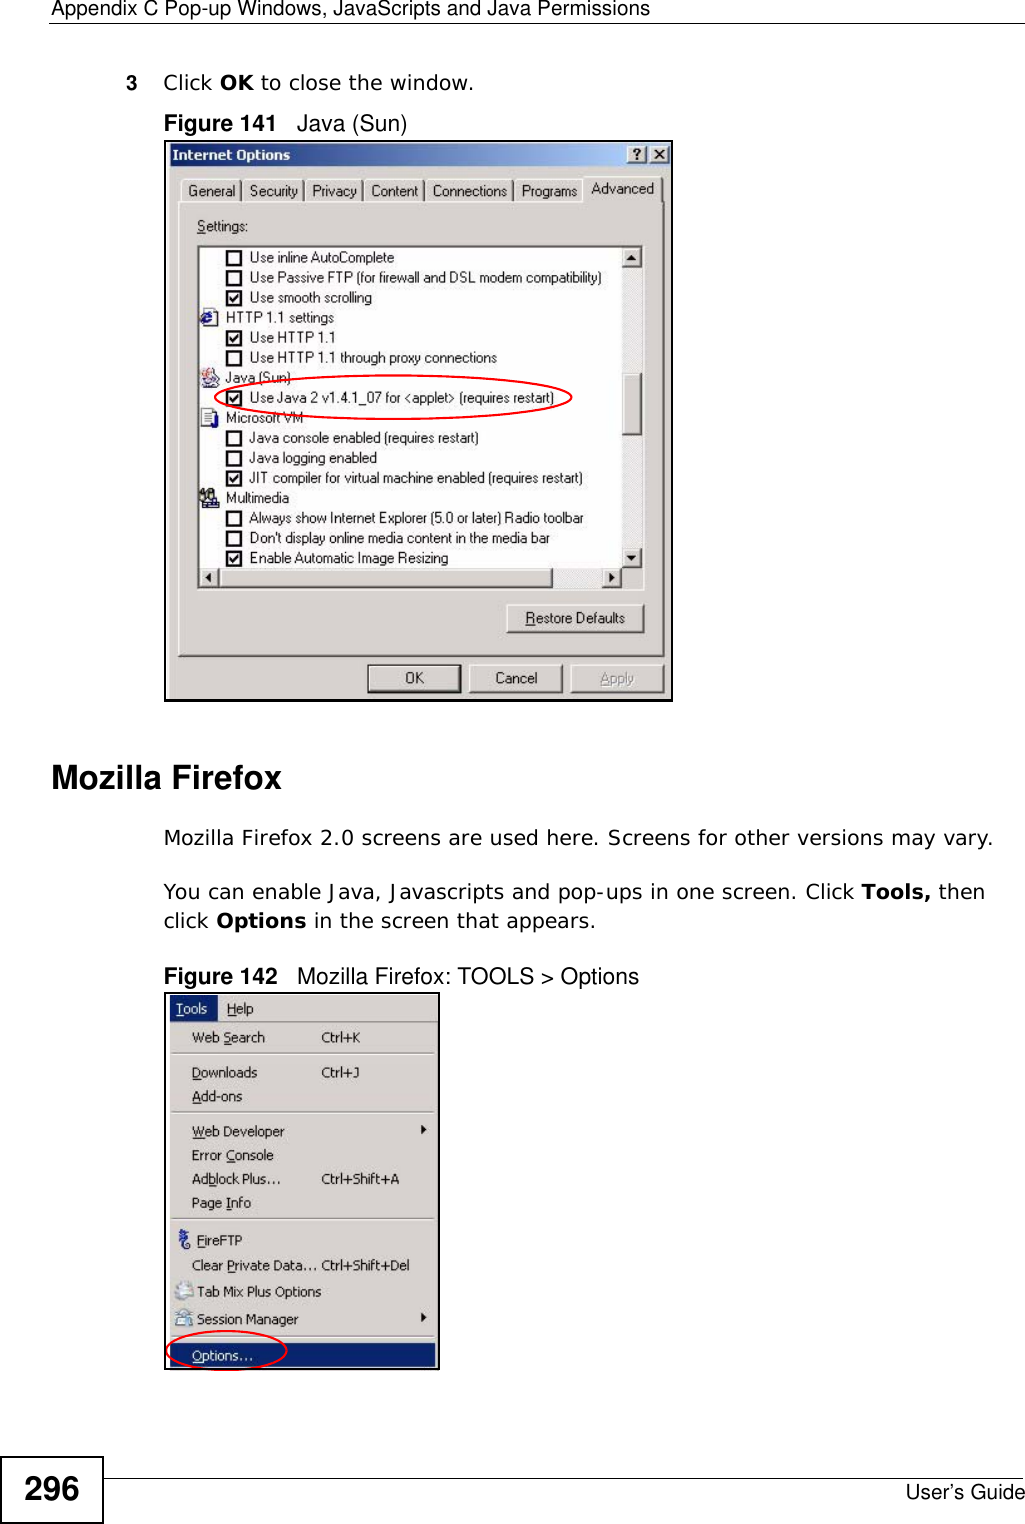 Appendix C Pop-up Windows, JavaScripts and Java PermissionsUser’s Guide2963Click OK to close the window.Figure 141   Java (Sun)Mozilla FirefoxMozilla Firefox 2.0 screens are used here. Screens for other versions may vary. You can enable Java, Javascripts and pop-ups in one screen. Click Tools, then click Options in the screen that appears.Figure 142   Mozilla Firefox: TOOLS &gt; Options